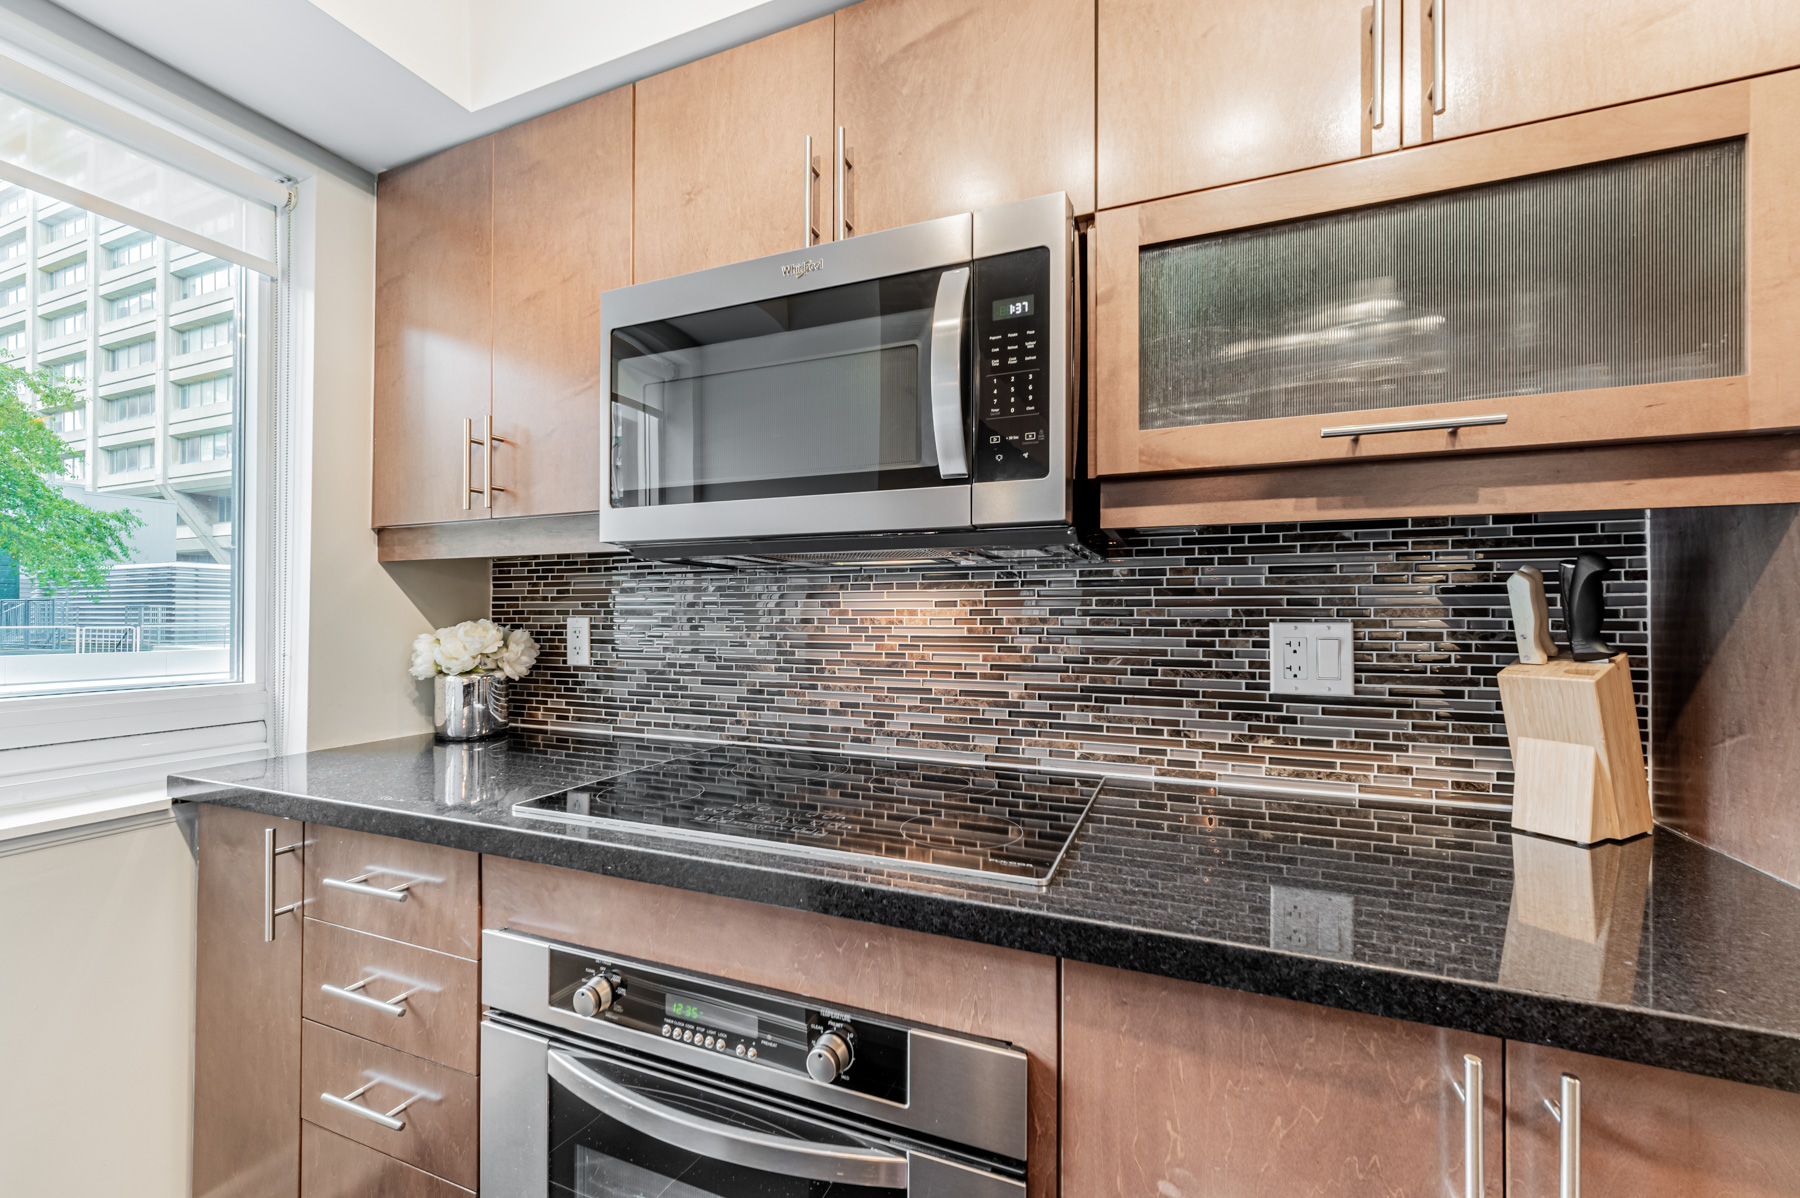 Closer view of kitchen's wood cabinets, ceramic back-splash and quartz counter-tops.